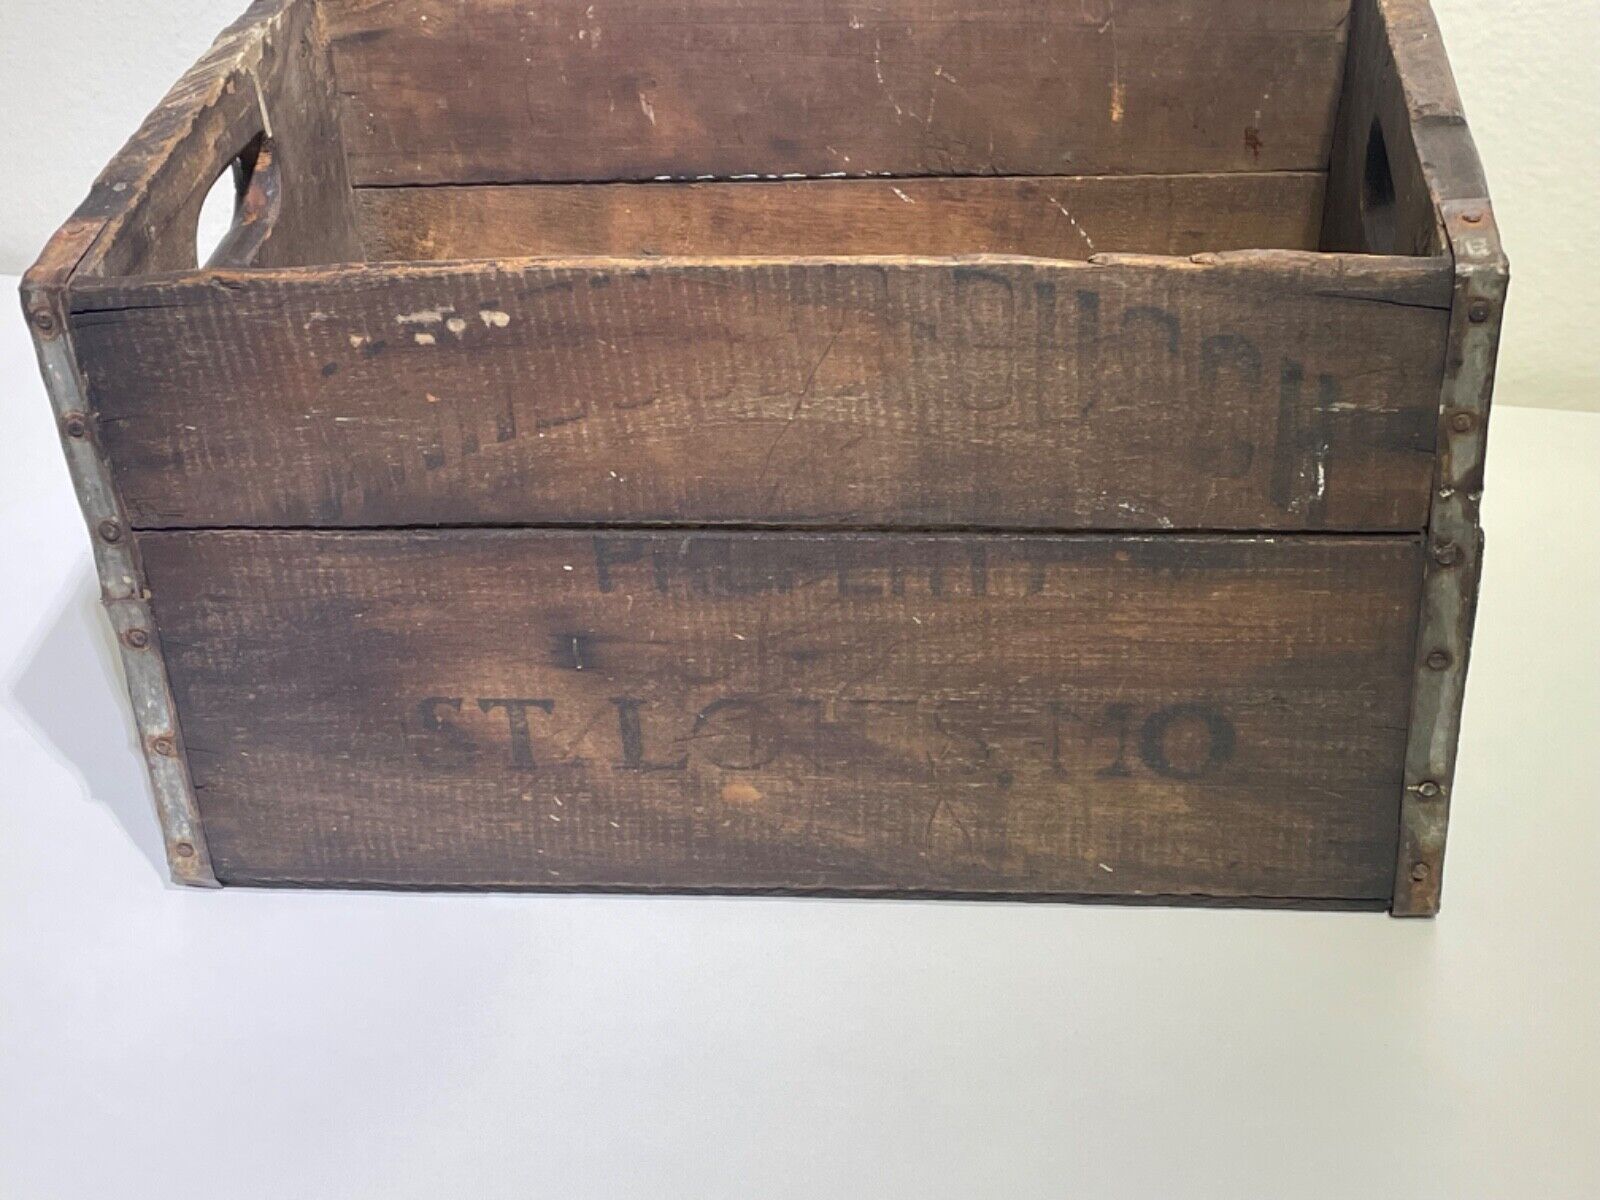 Early Breweriana | Antique Anheuser Busch Wood Beer Crate St. Louis Missouri